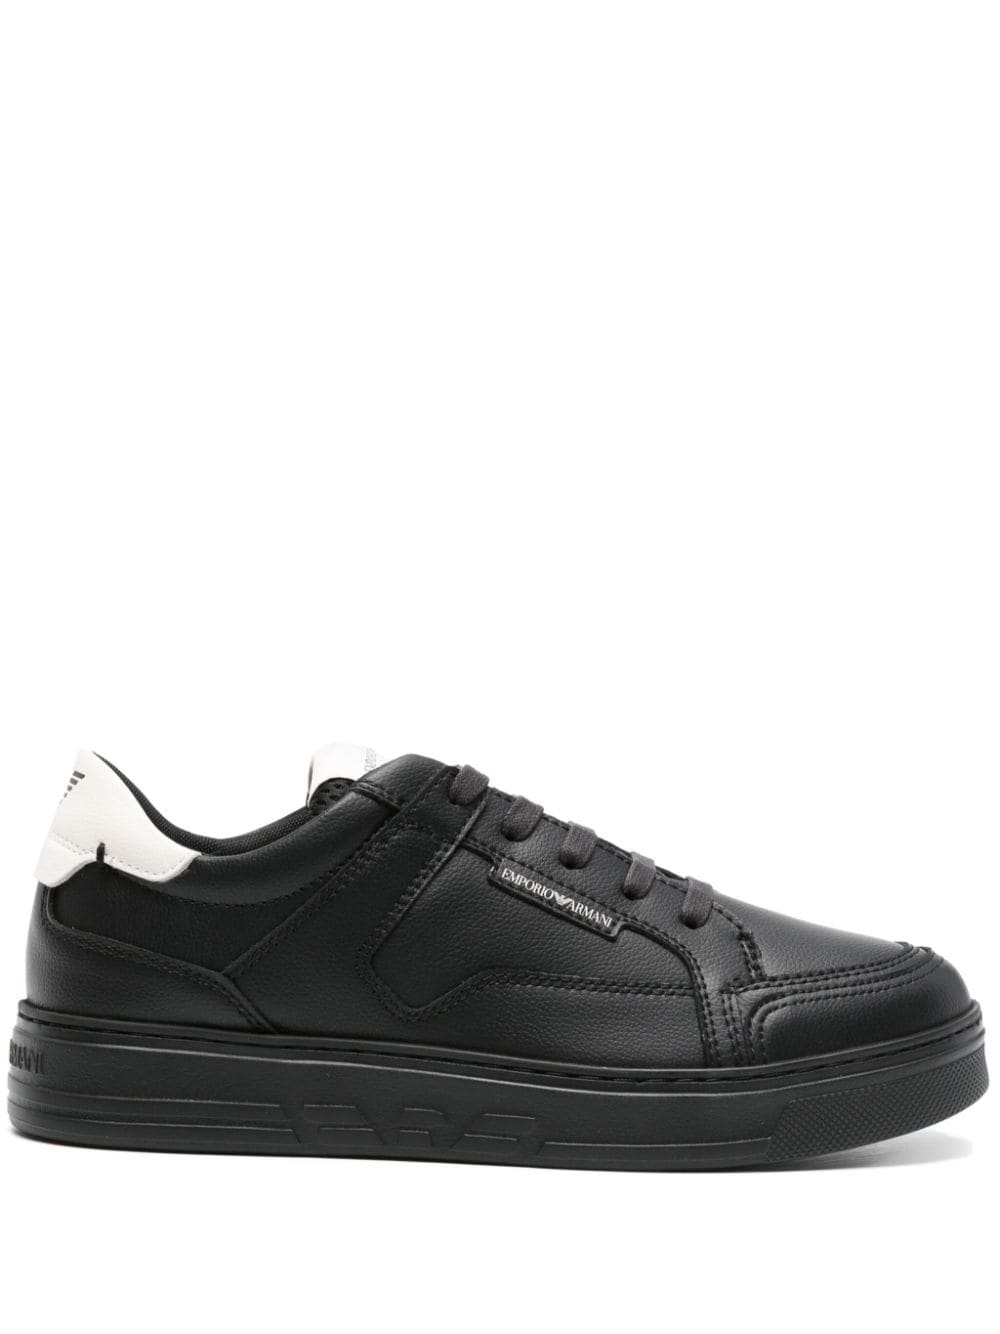 Emporio Armani lace-up Leather Sneakers - Farfetch